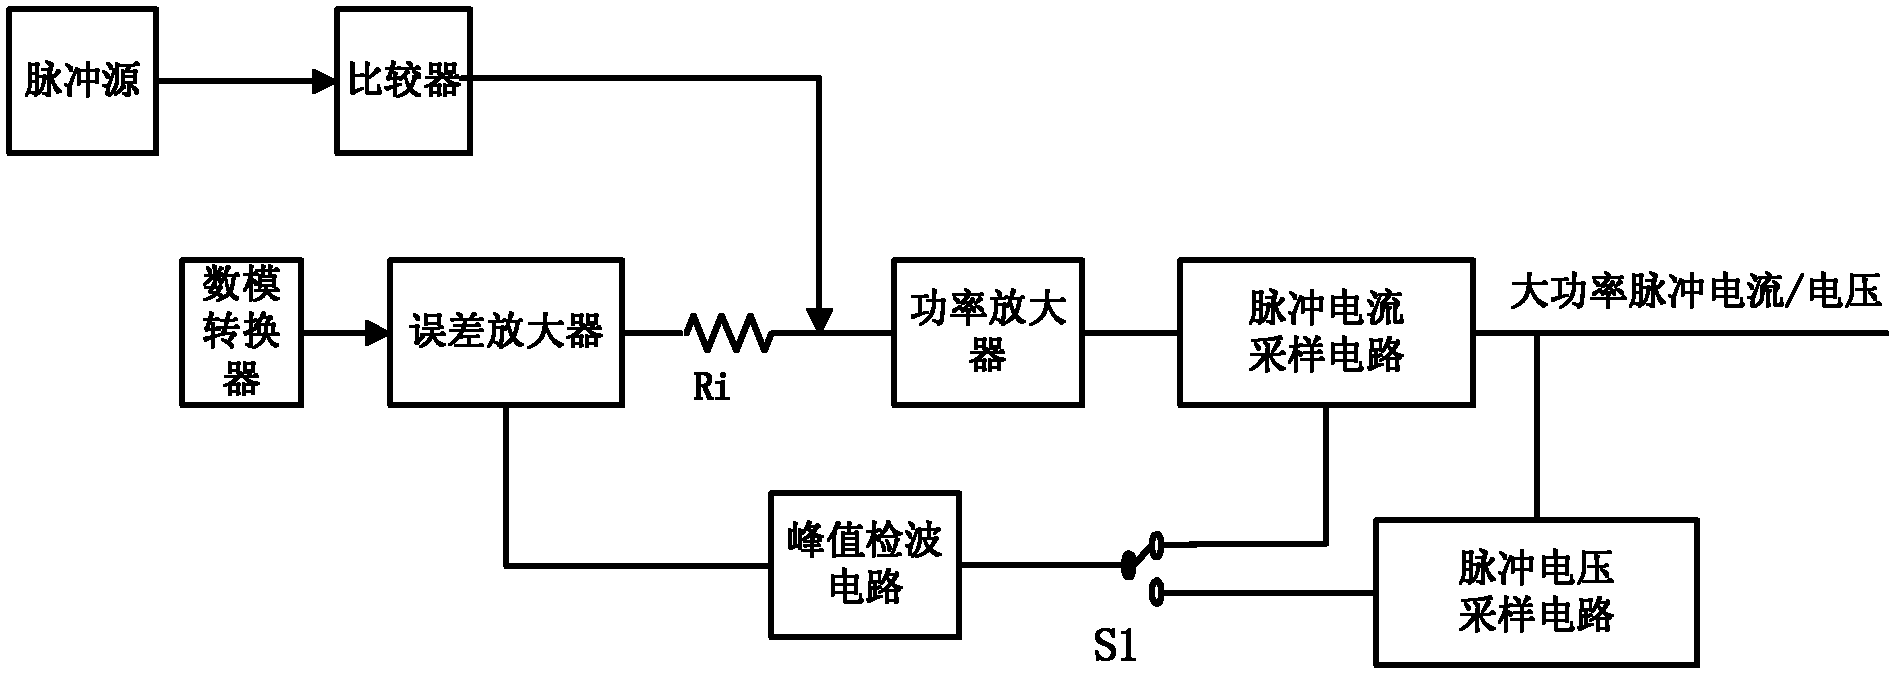 A High Power Pulse Current/Voltage Generating Circuit